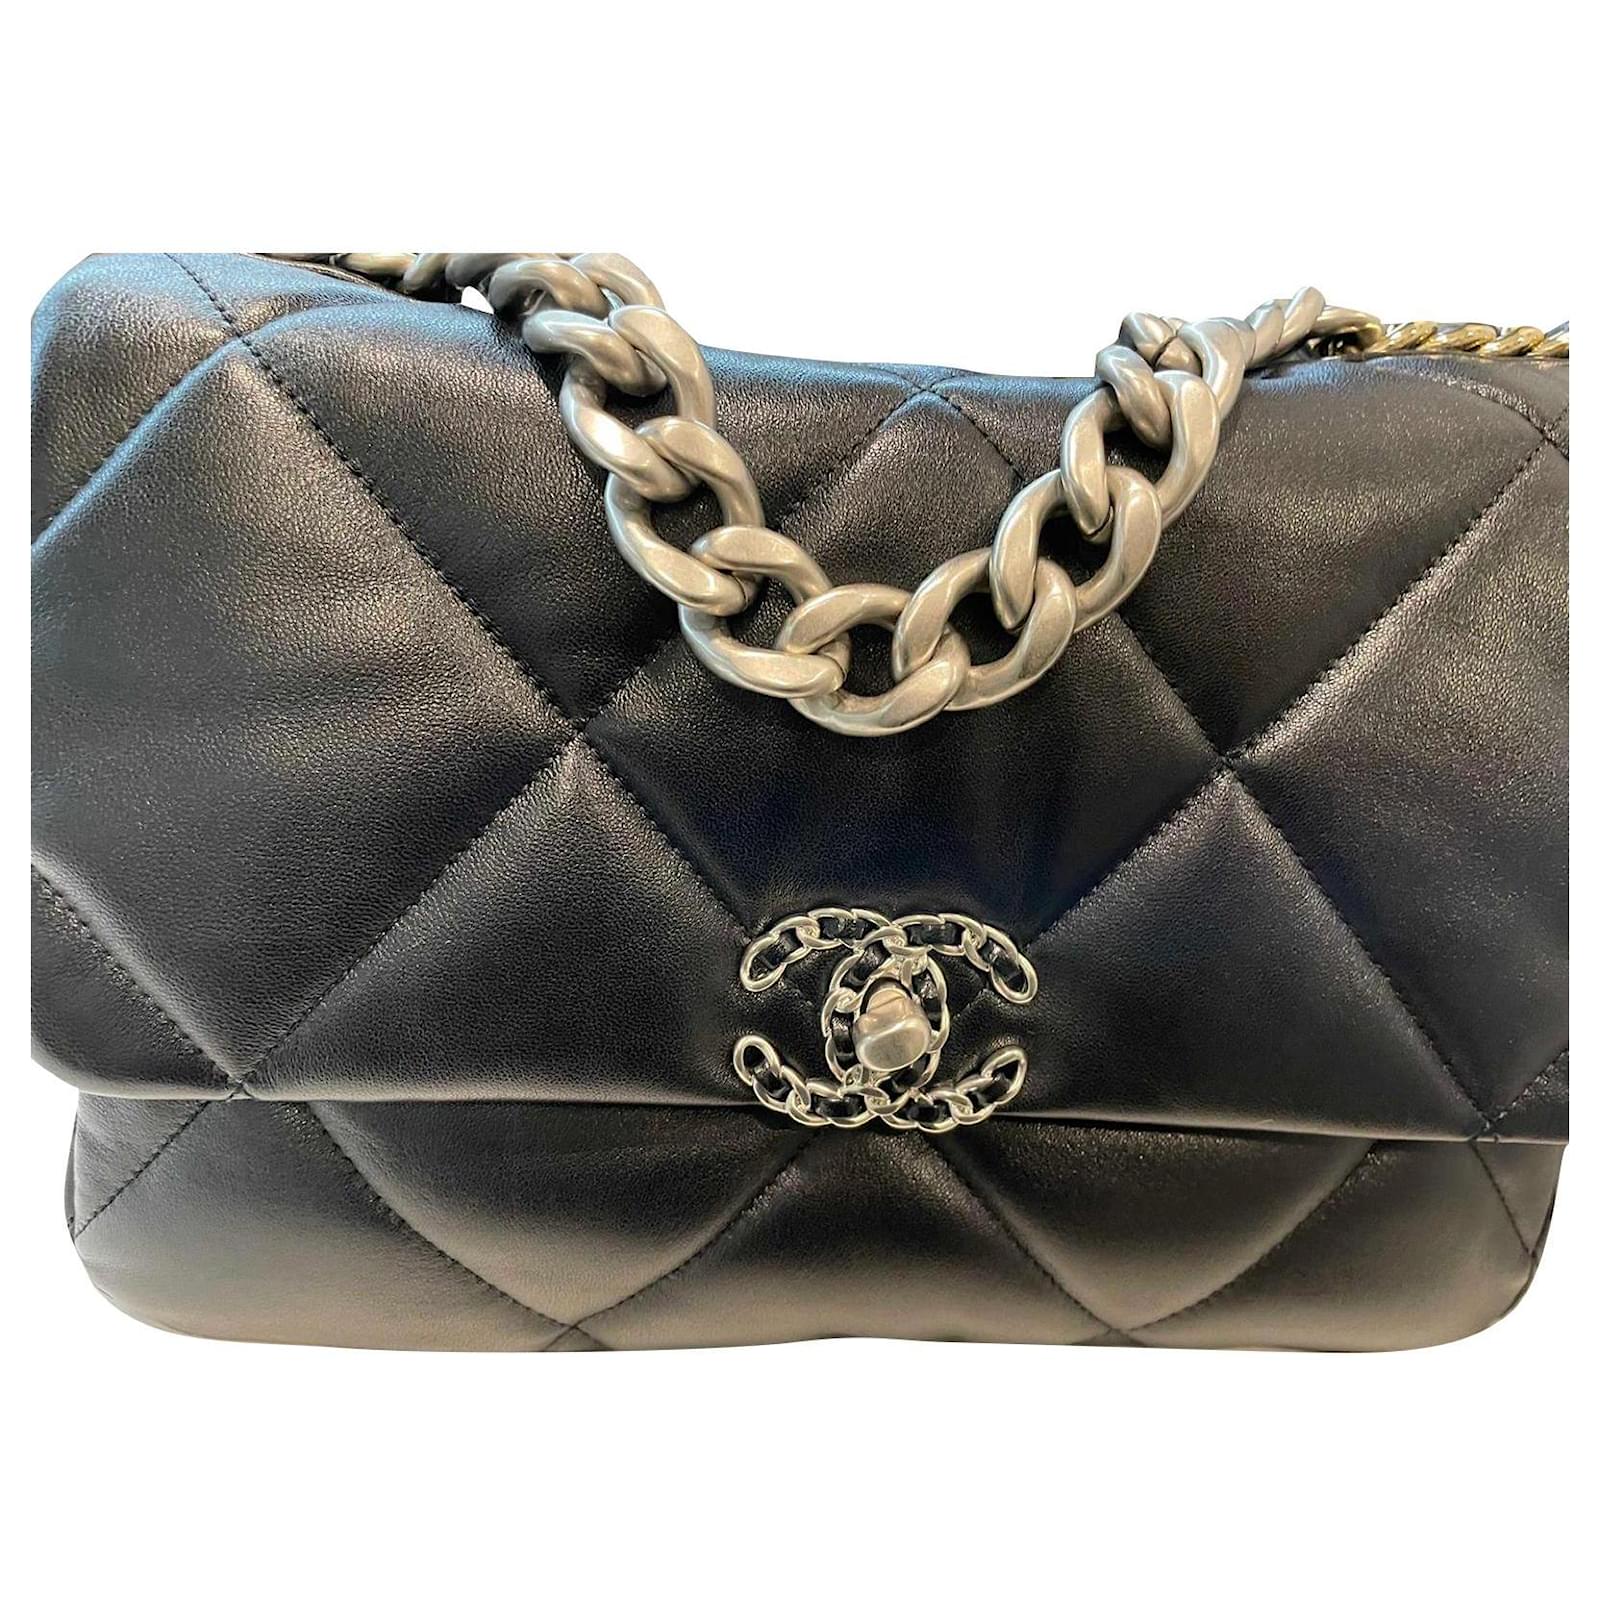 Chanel Black Quilted Lambskin Large Chanel 19 Flap Gold And